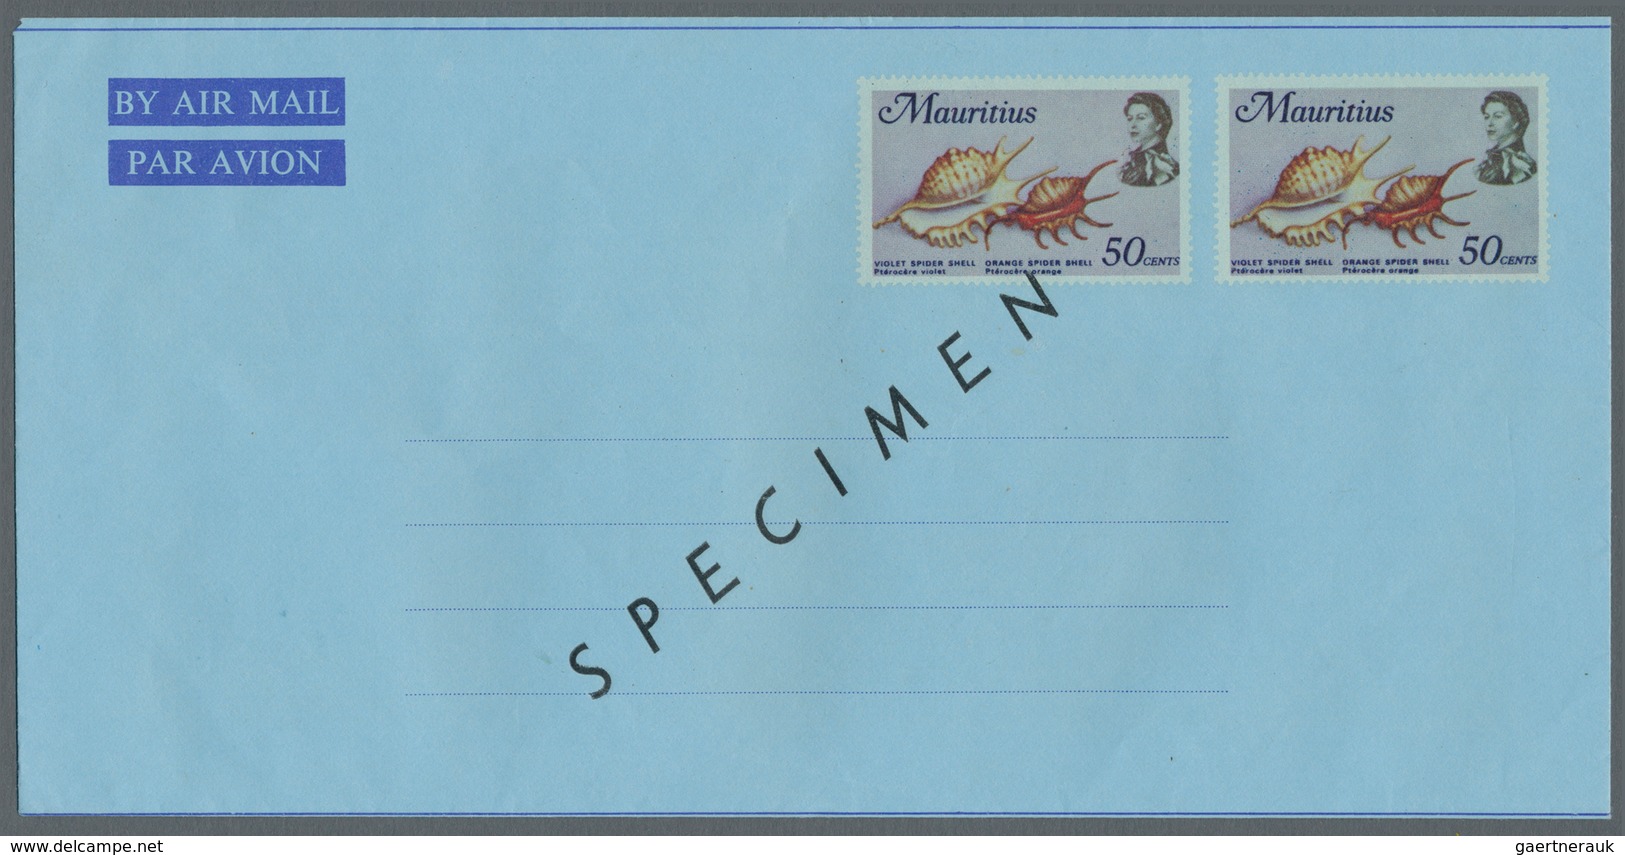 Mauritius: 1947/1999 (ca.), AEROGRAMMES: accumulation with about 900 unused and used/CTO airletters